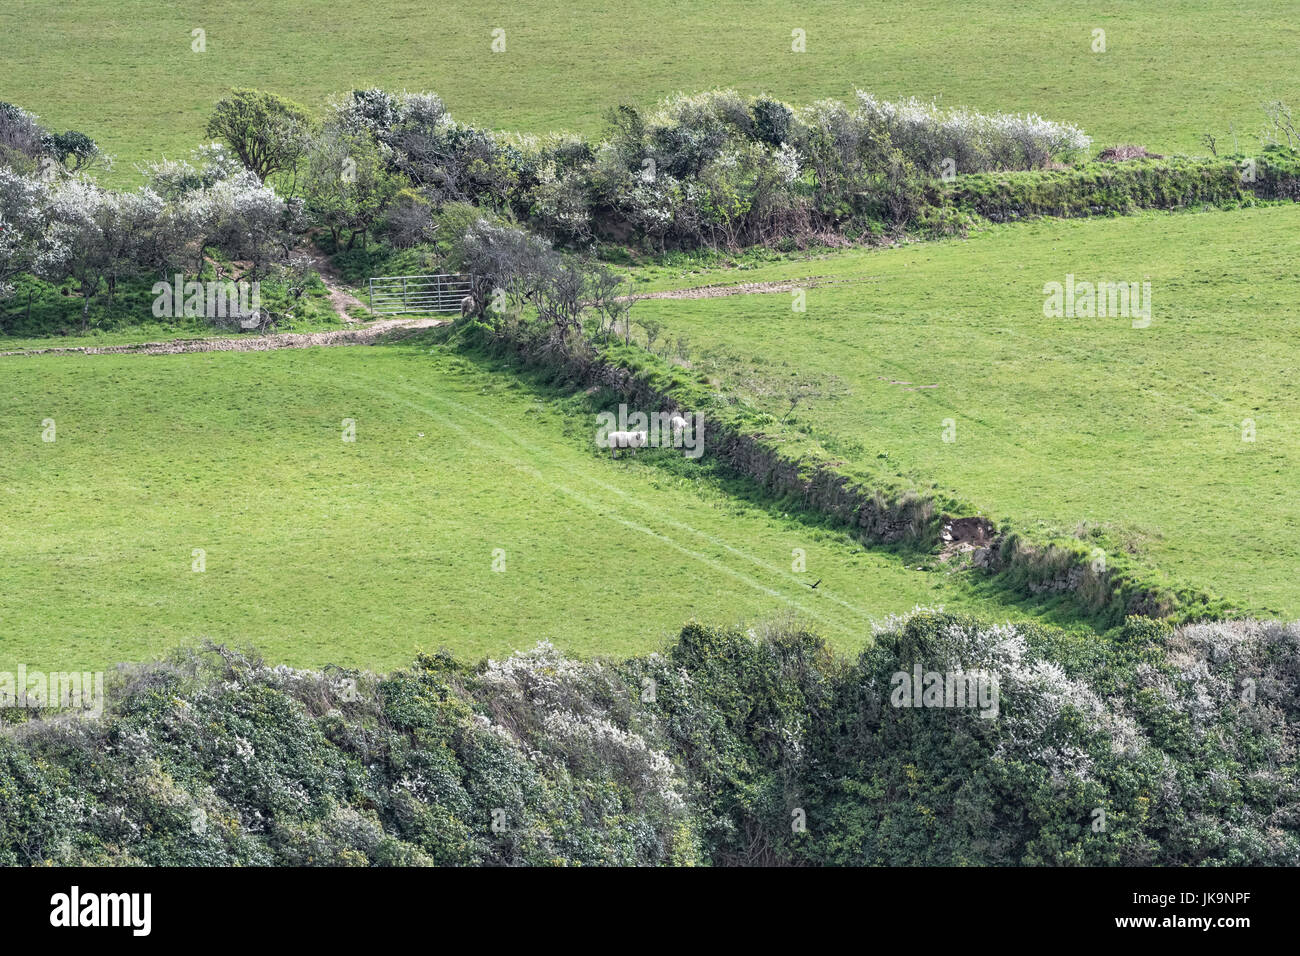 Sheep seen next to a Cornish hedgerow - hedgerows being valuable wildlife habitats as well as being windbreaks and boundary markers. Stock Photo